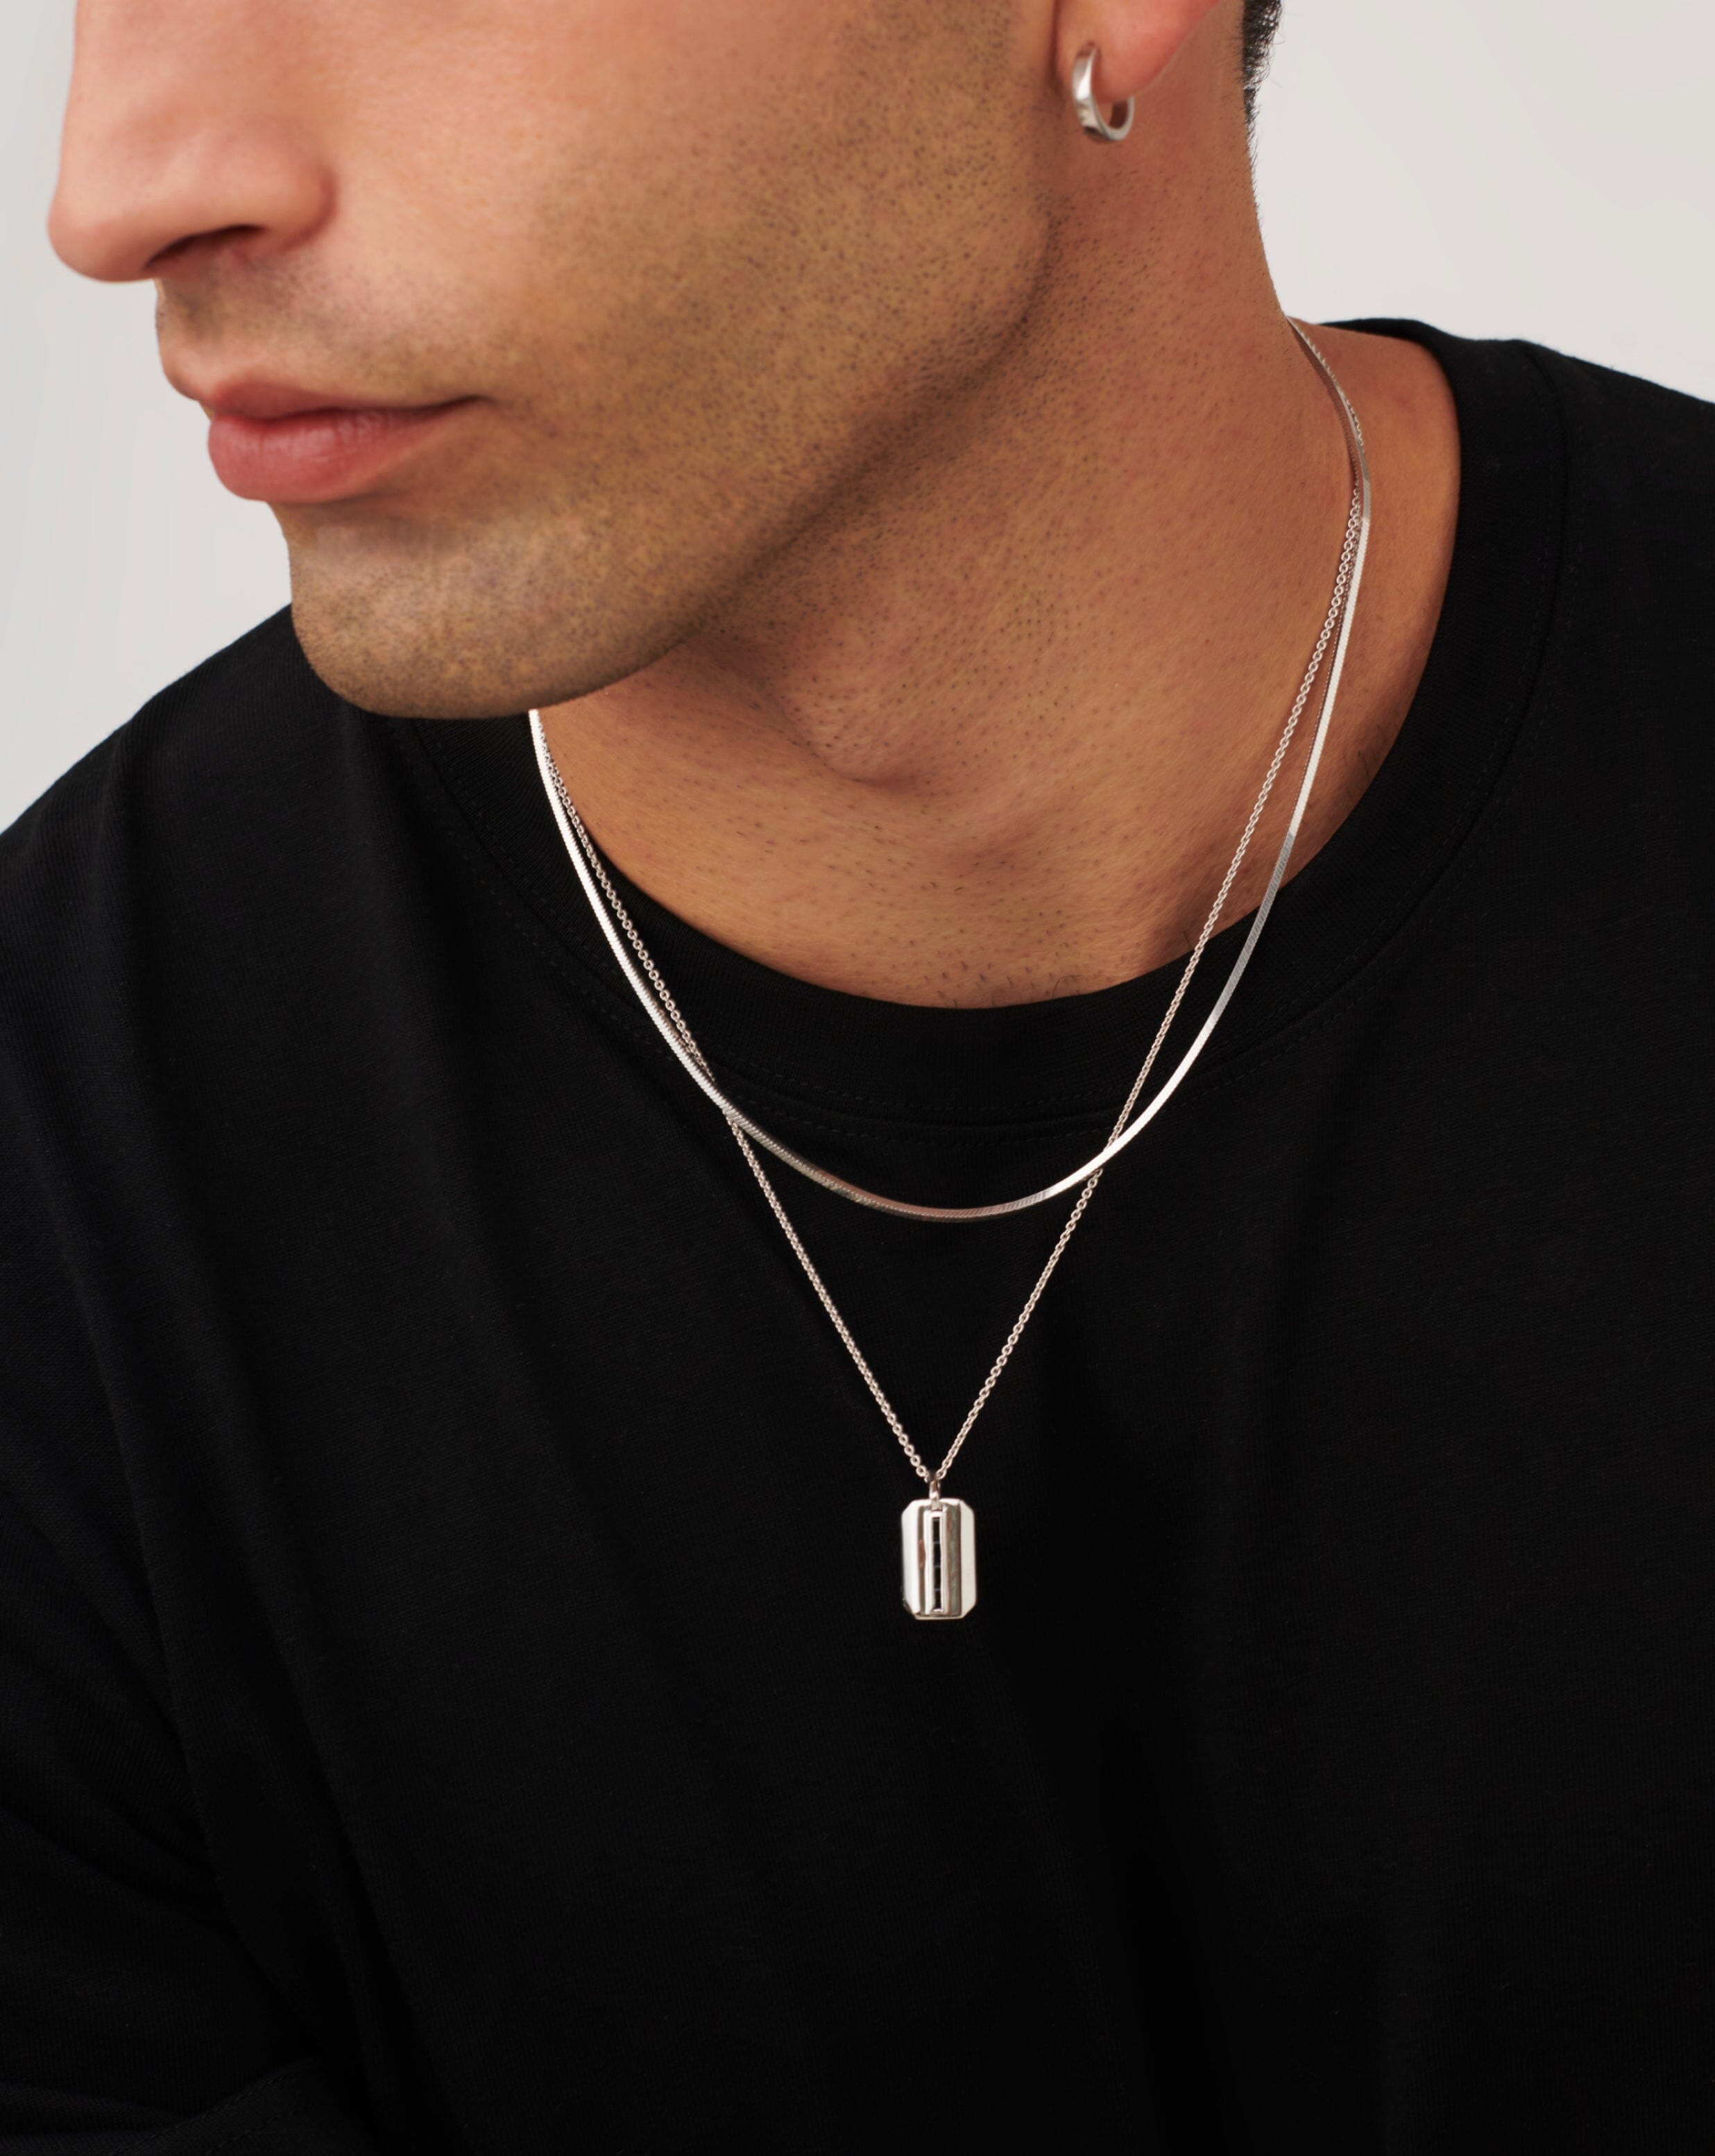 Buy Mens Necklace Mini Black Onyx Silver Pendant Necklace for Men Gemstone  Charm, Mens Jewelry, Minimalist Chain Pendant by Twistedpendant Online in  India - Etsy